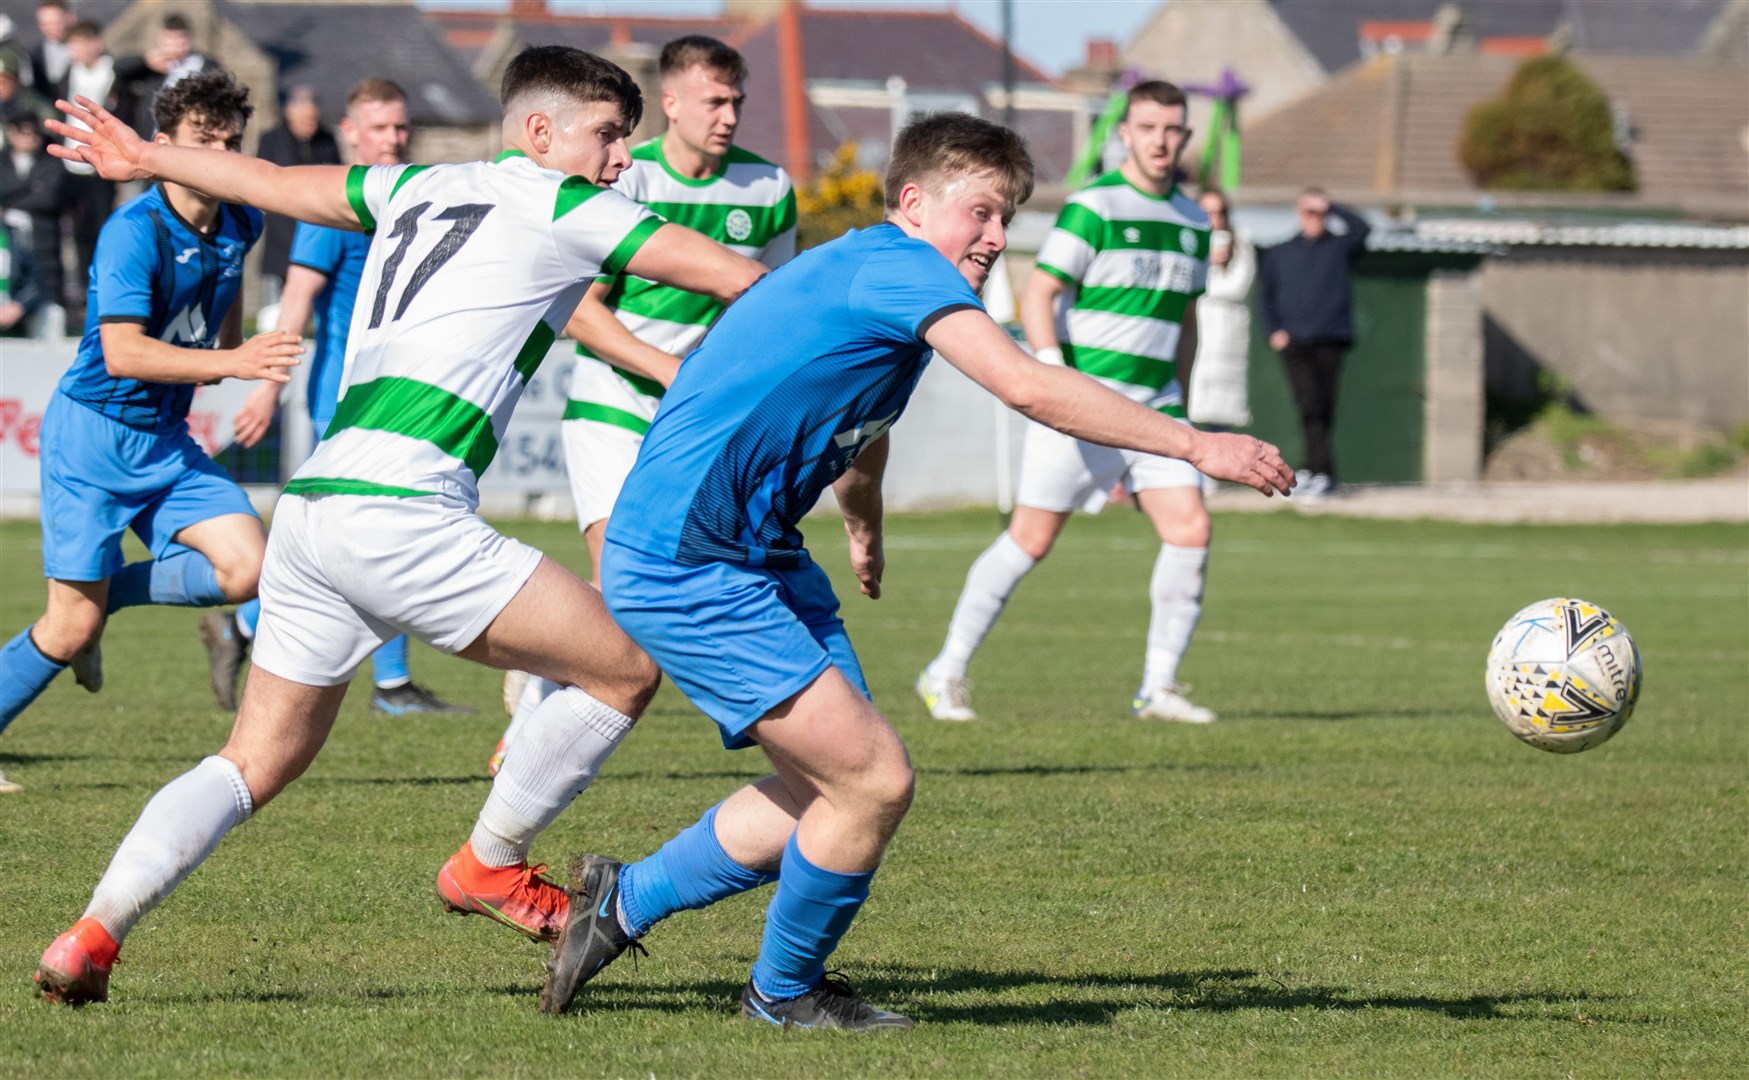 Strathspey's Joe Cuthbert (right) is pulled back by Buckie Thistle's Max Barry...Buckie Thistle FC (5) vs Strathspey Thistle FC (0) - Highland Football League - Victoria Park, Buckie 02/04/2022...Picture: Daniel Forsyth..